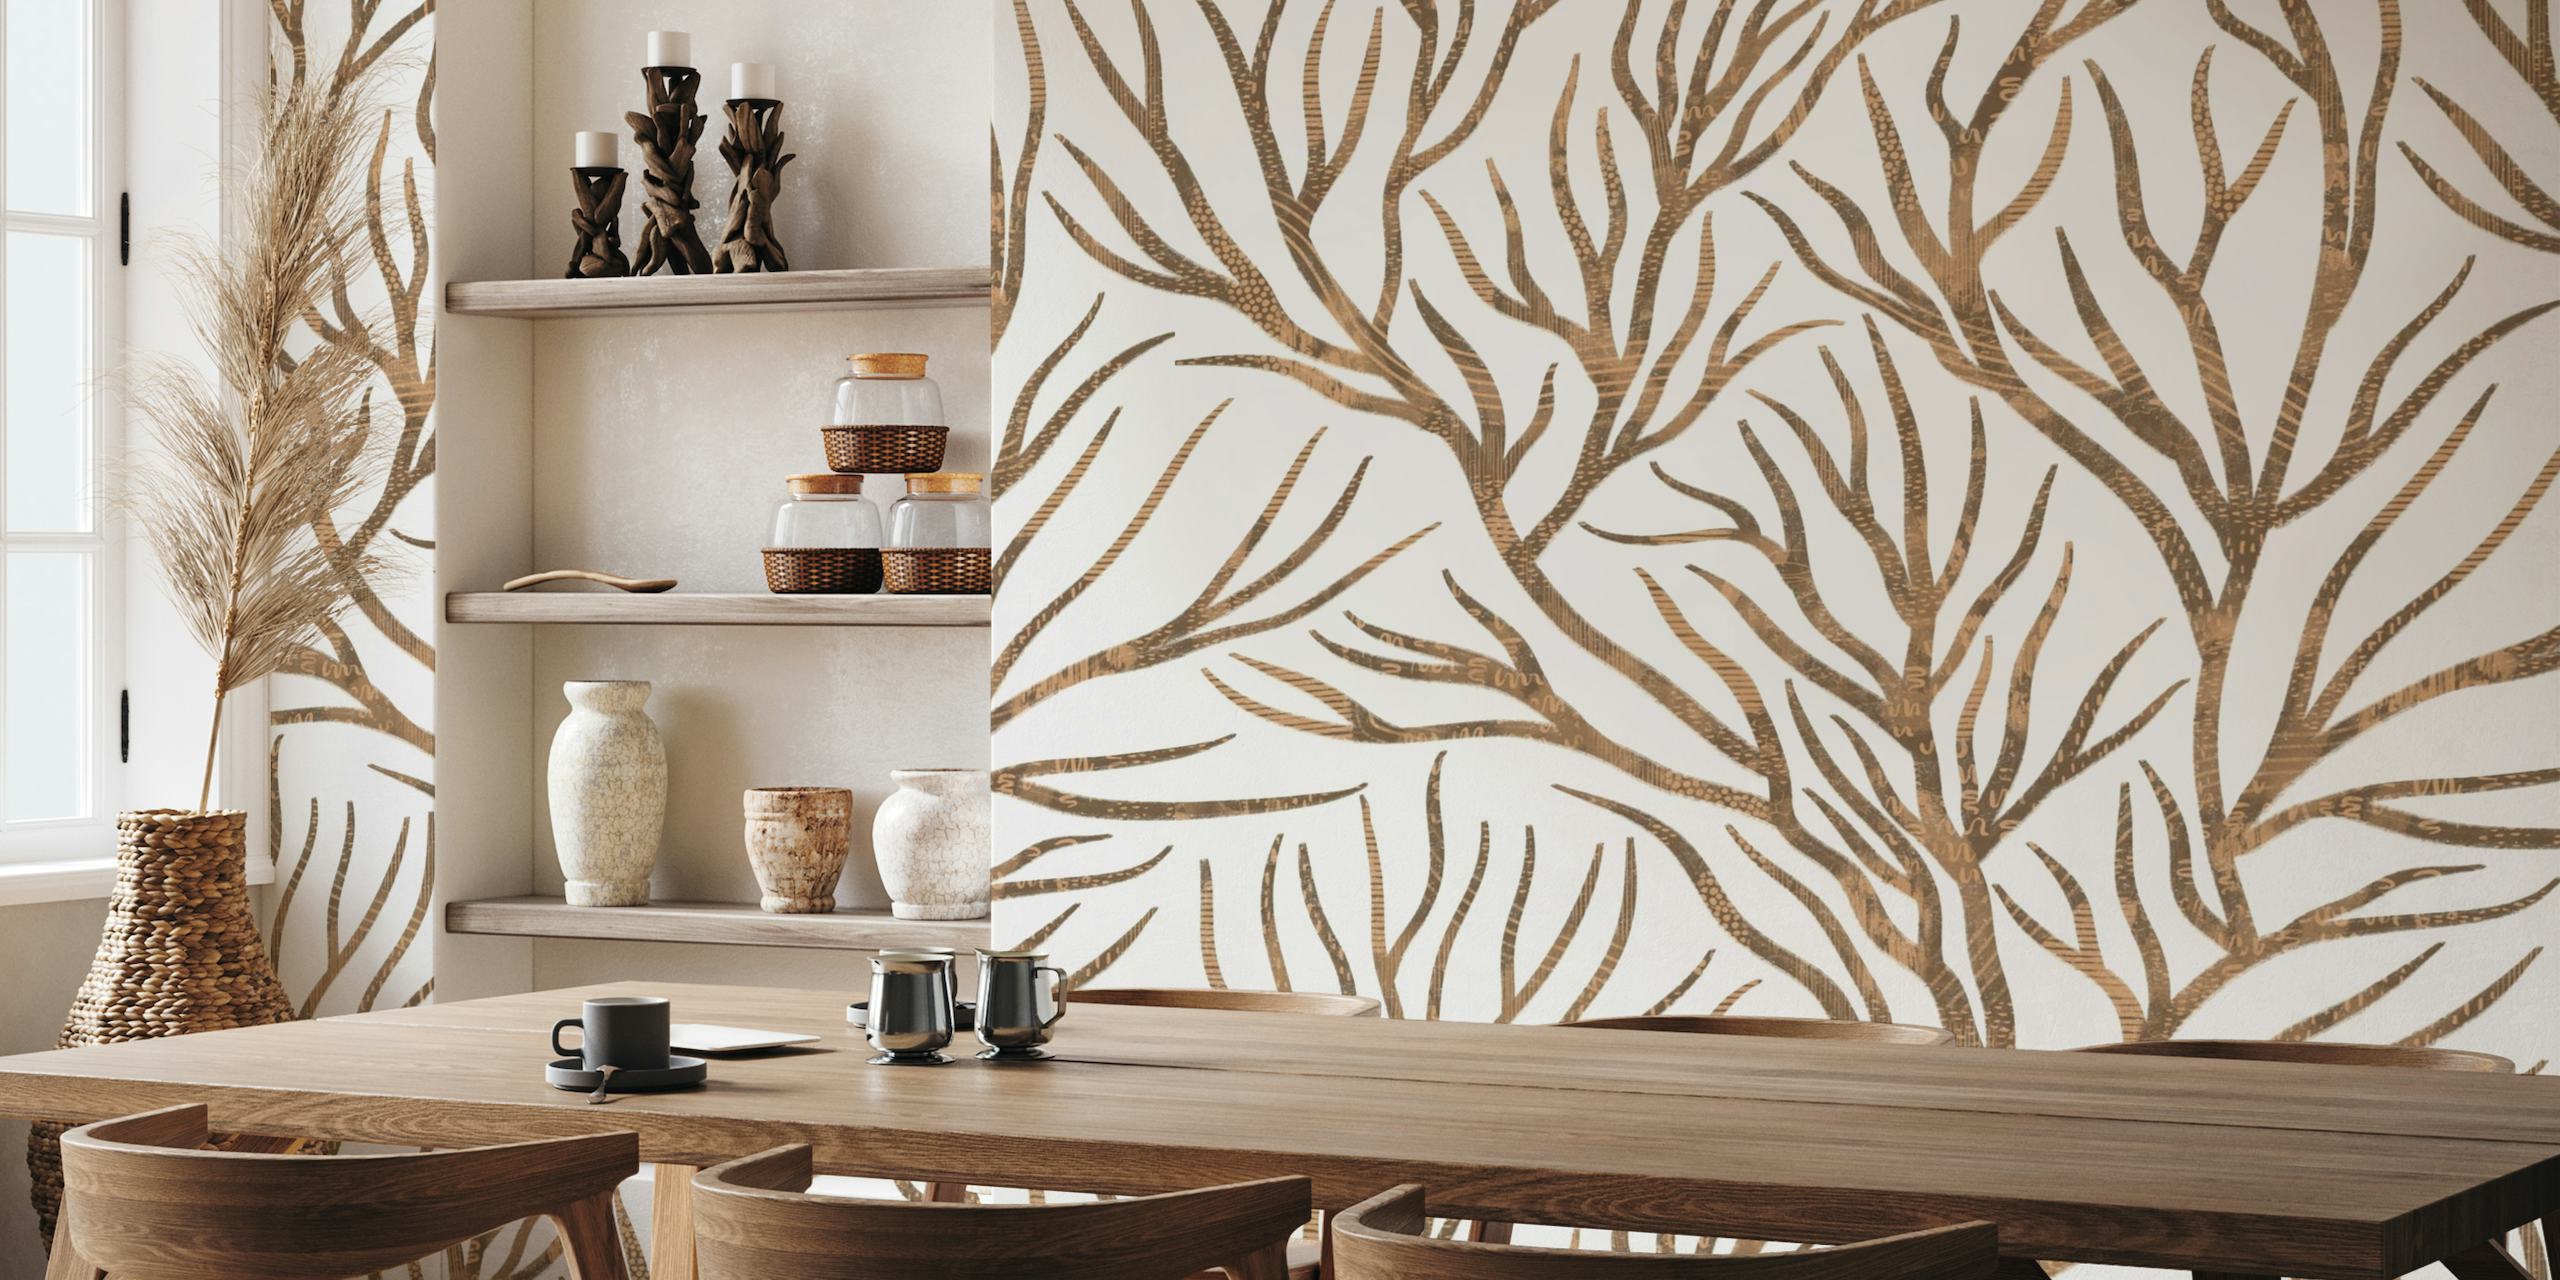 Tree Branches 1 wall mural with elegant brown branches on a creamy background